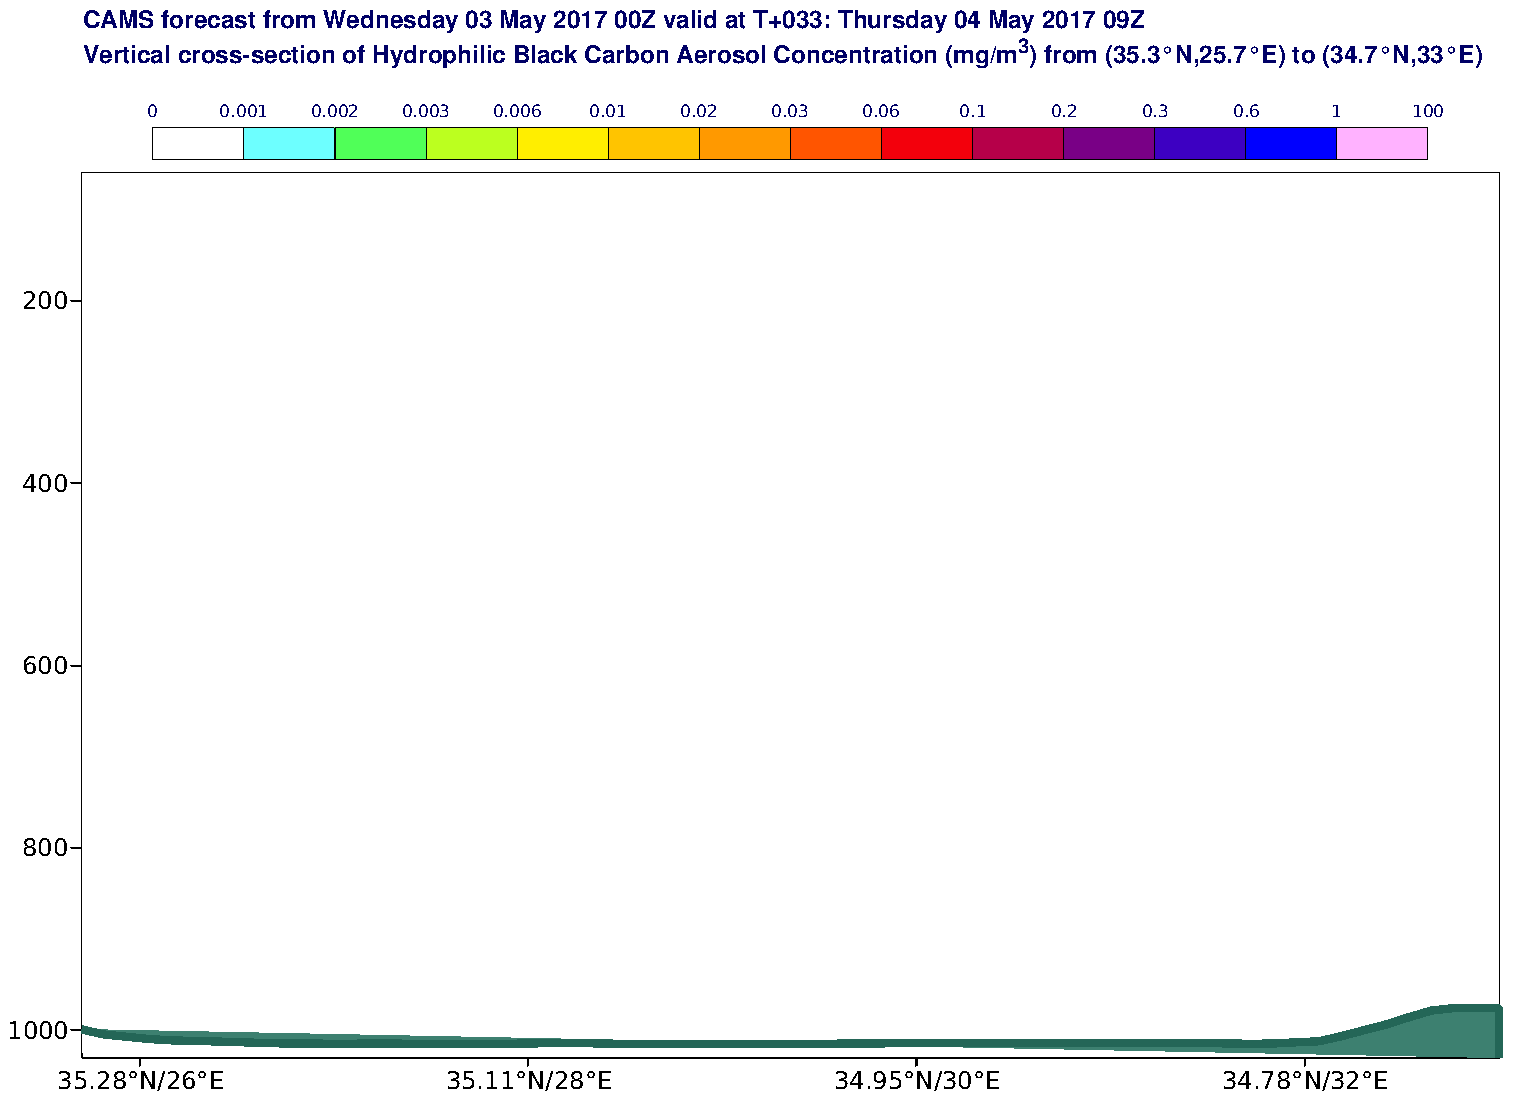 Vertical cross-section of Hydrophilic Black Carbon Aerosol Concentration (mg/m3) valid at T33 - 2017-05-04 09:00